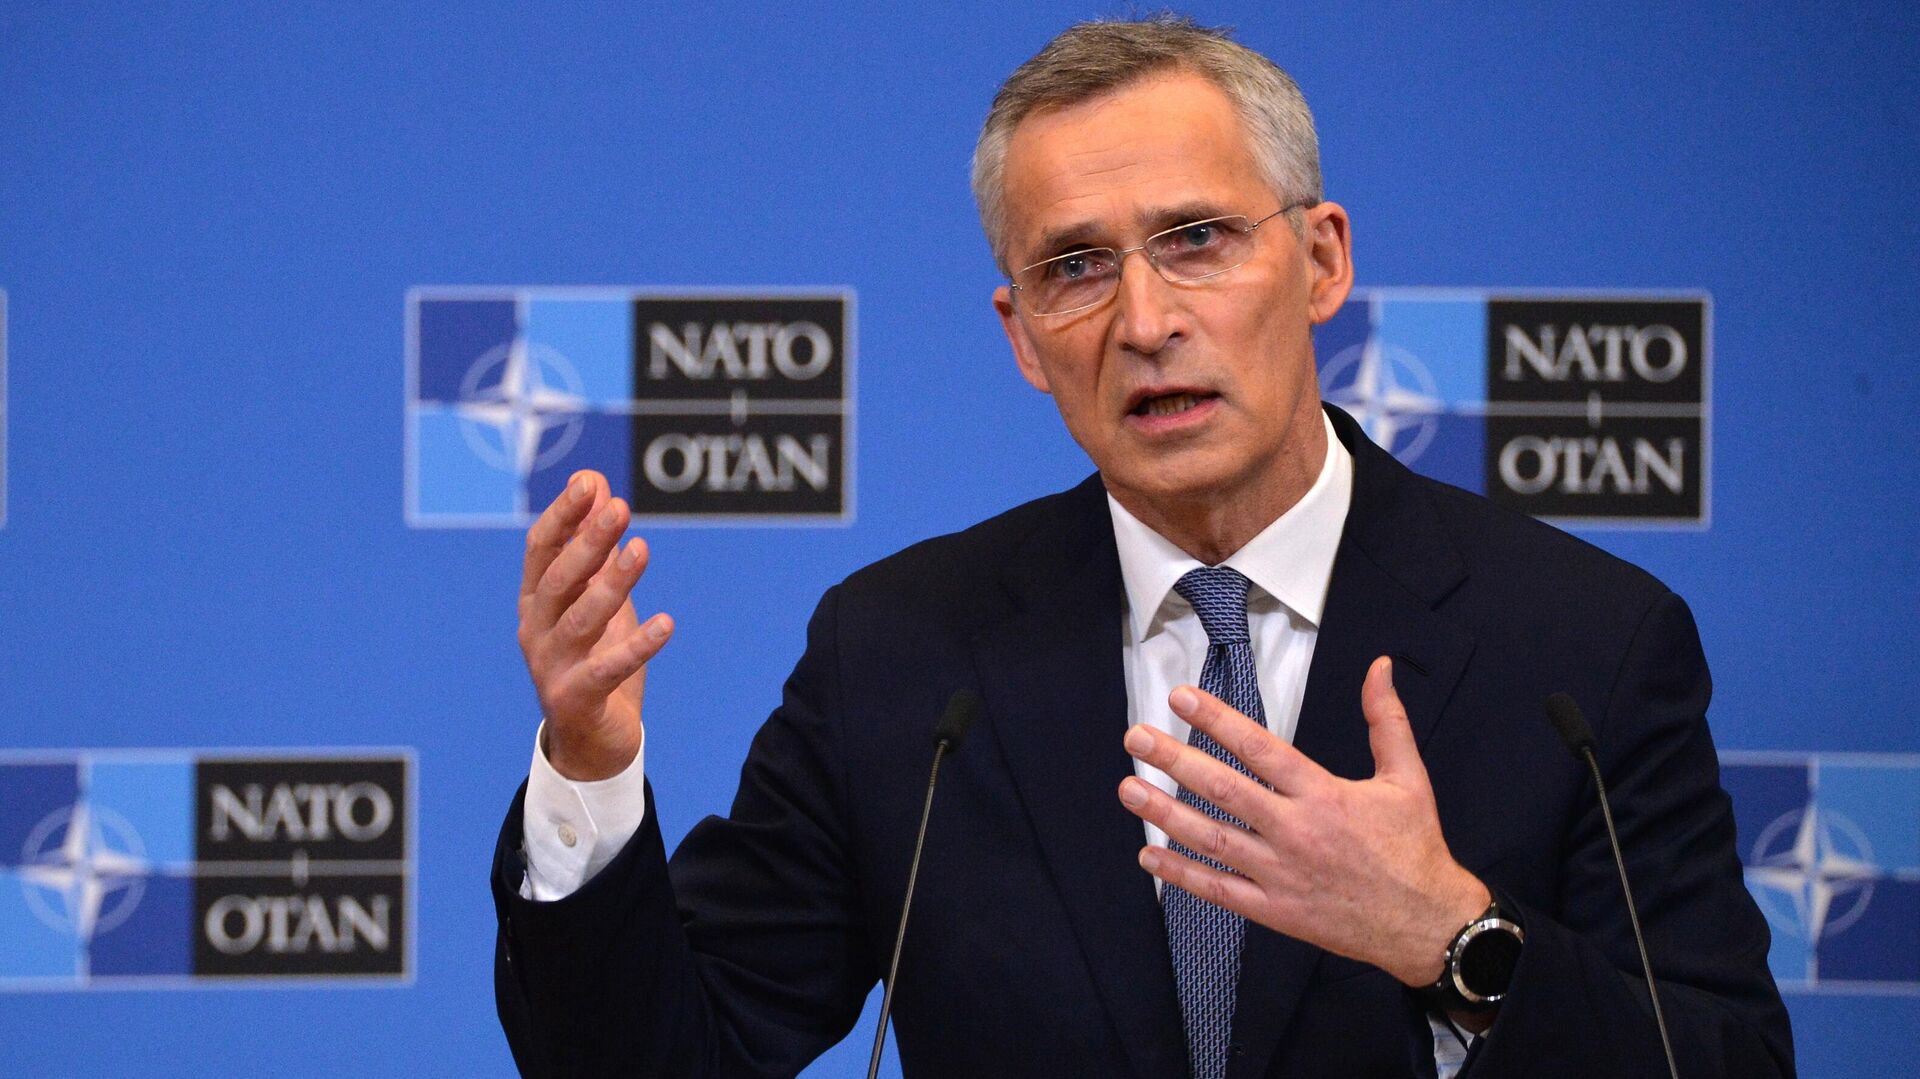 NATO welcomes Turkey’s decision to start approving Finland’s application